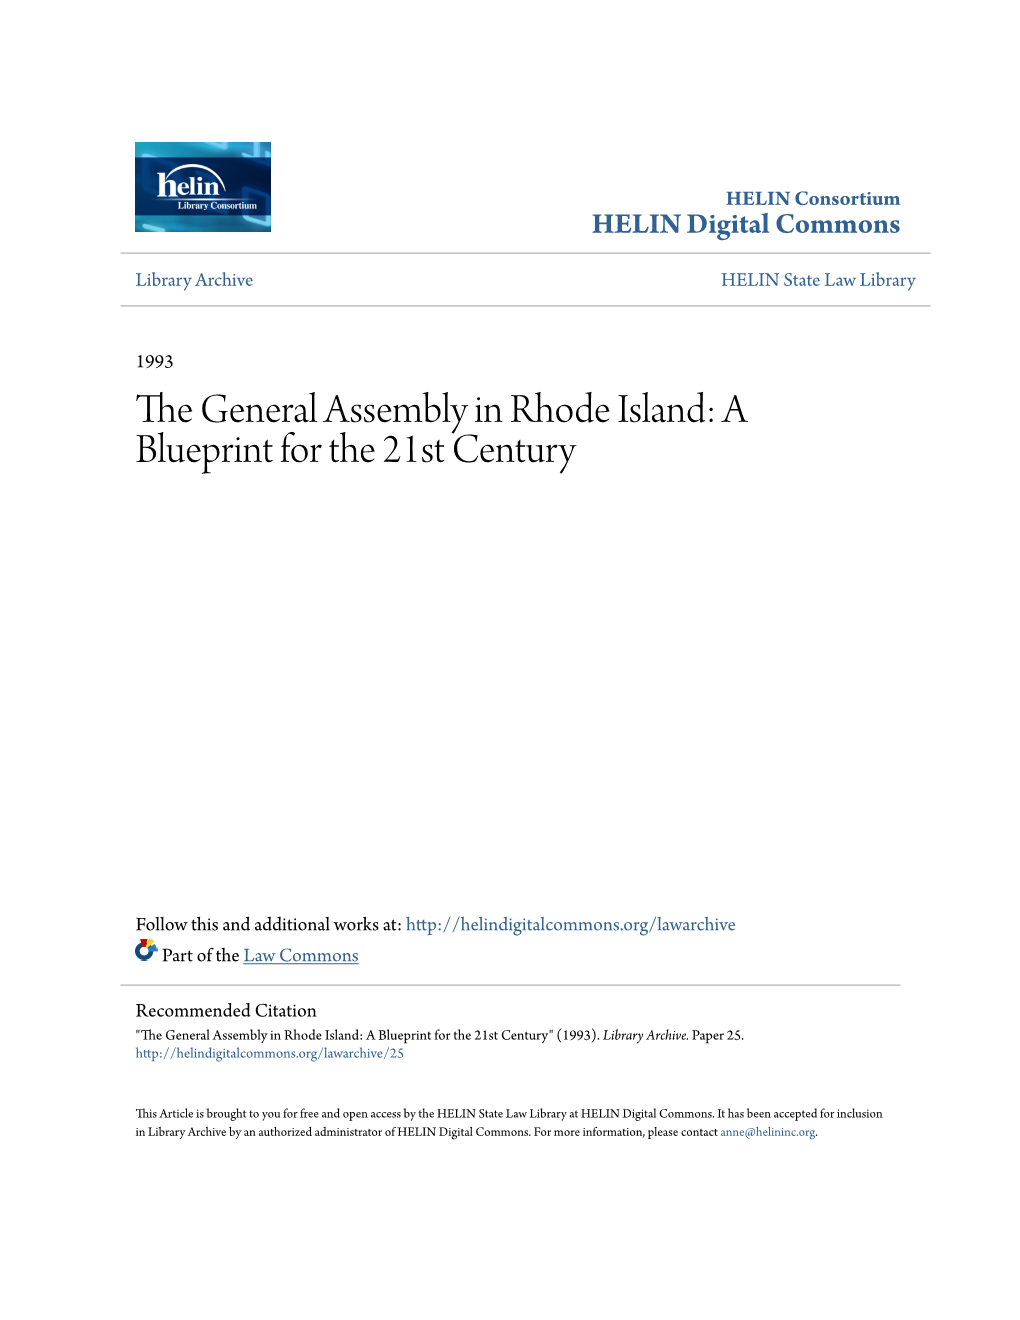 The General Assembly in Rhode Island: a Blueprint for the 21St Century